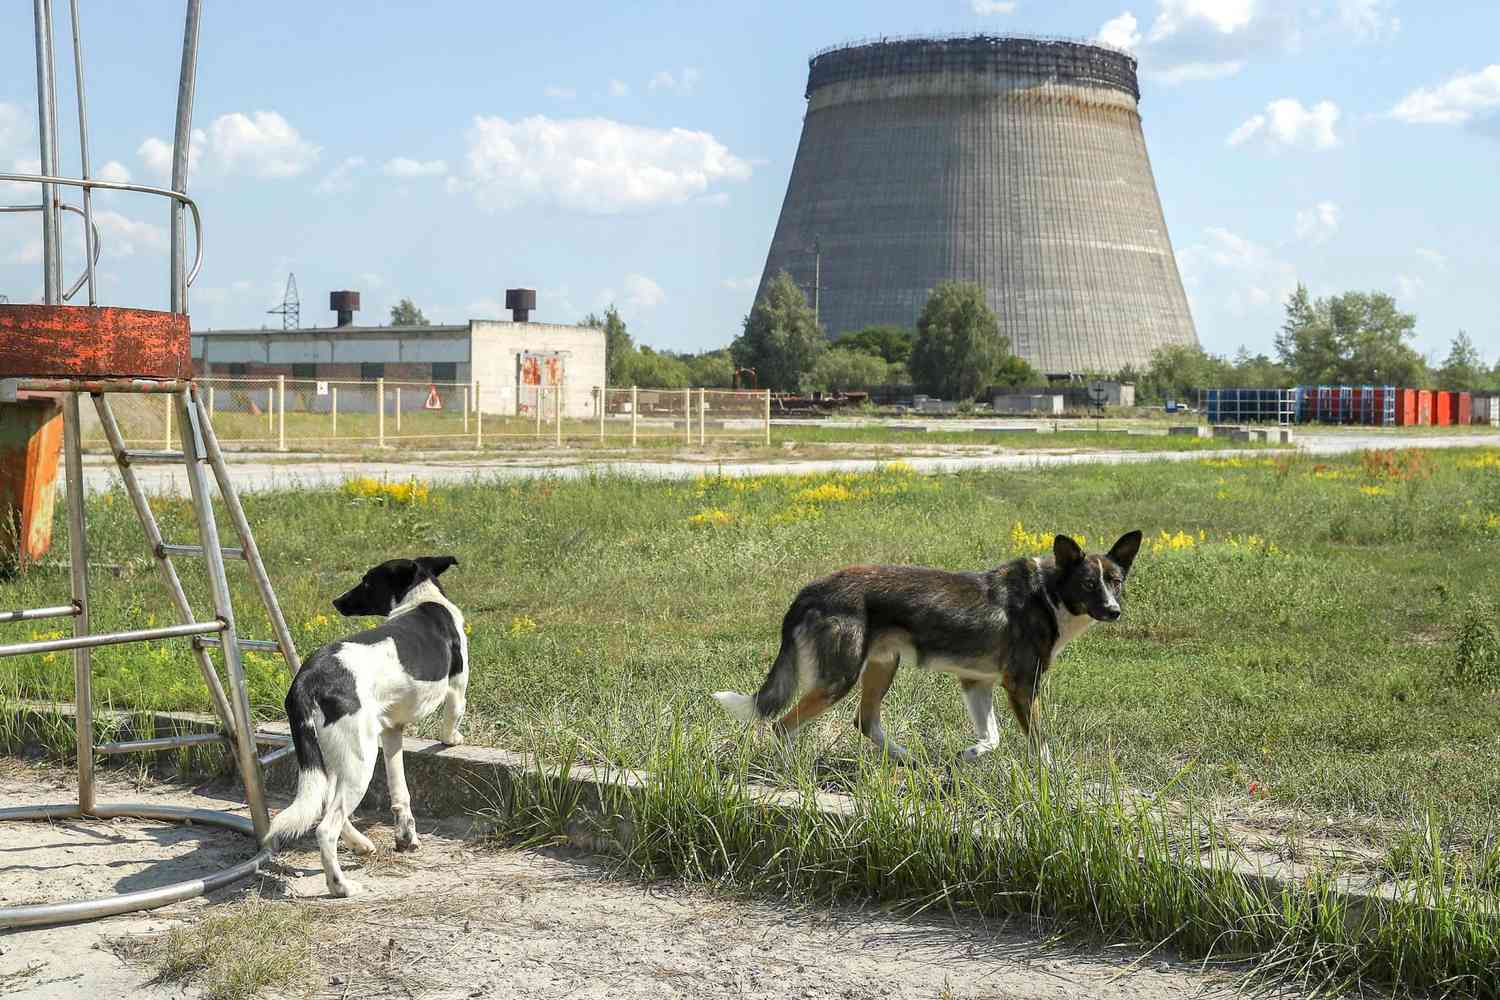 CHORNOBYL, UKRAINE - AUGUST 18: Stray dogs hang out near an abandoned, partially-completed cooling tower at the Chernobyl nuclear power plant on August 18, 2017 near Chornobyl, Ukraine. An estimated 900 stray dogs live in the exclusion zone, many of them likely the descendants of dogs left behind following the mass evacuation of residents in the aftermath of the 1986 nuclear disaster at Chernobyl. Volunteers, including veterinarians and radiation experts from around the world, are participating in an initiative called The Dogs of Chernobyl, launched by the non-profit Clean Futures Fund. Participants capture the dogs, study their radiation exposure, vaccinate them against parasites and diseases including rabies, tag the dogs and release them again into the exclusion zone. Some dogs are also being outfitted with special collars equipped with radiation sensors and GPS receivers in order to map radiation levels across the zone. (Photo by Sean Gallup/Getty Images)